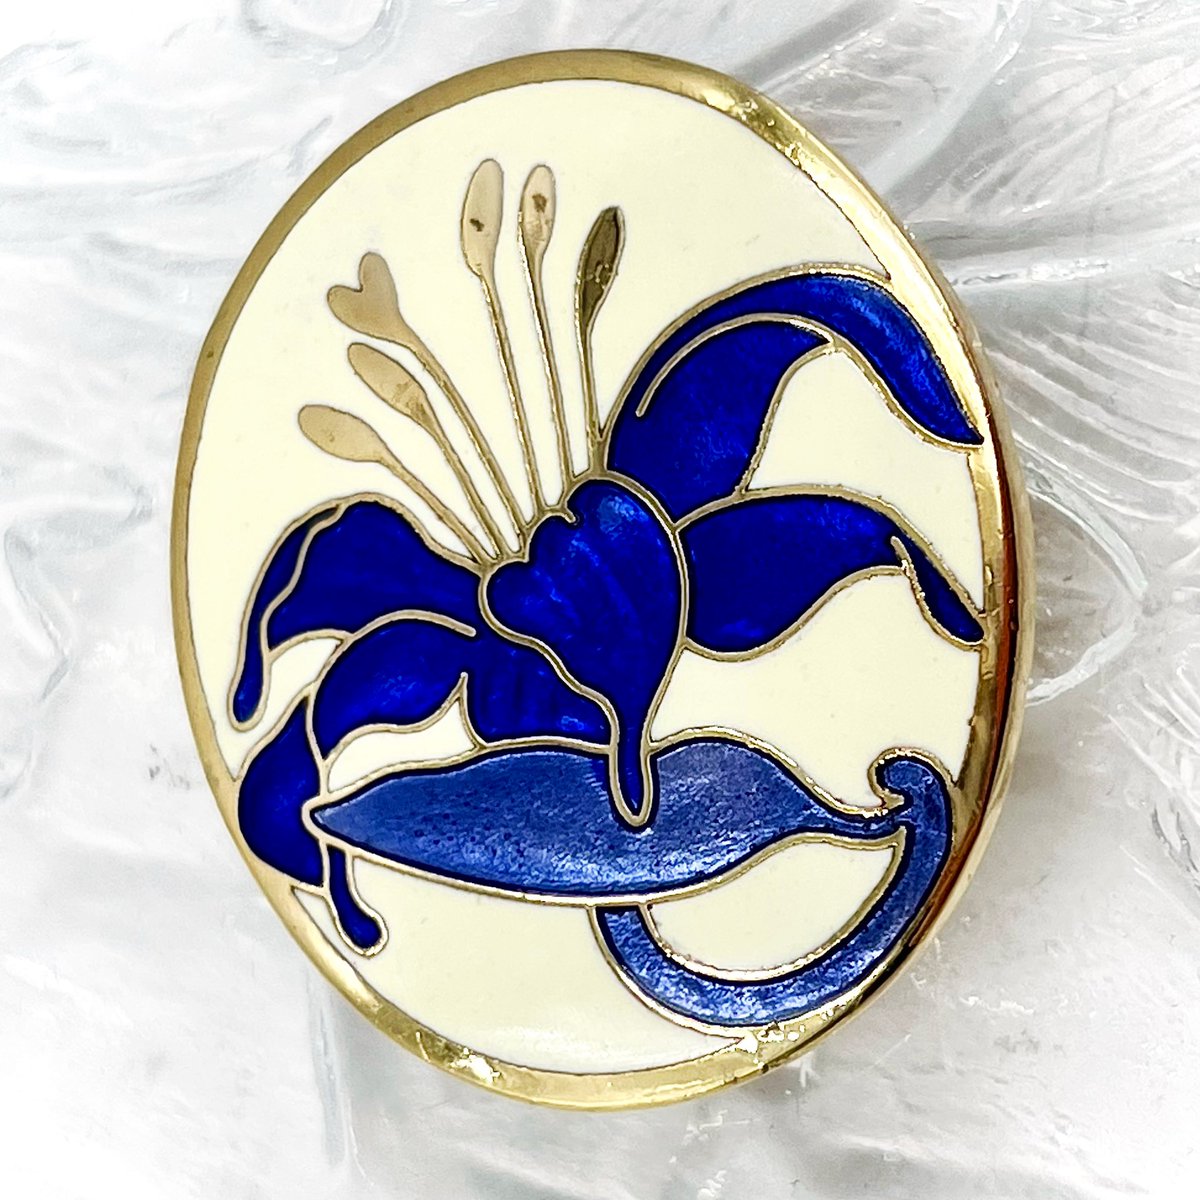 FISH & CROWN vintage cloisonné enamel brooch featuring a blue lily. For sale on Ebay: ebay.co.uk/itm/3144836296… #shopvintage #vintage #vintagebrooch #curios #cloisonne #enamelbrooch #flowerlower #gift #giftidea #lily